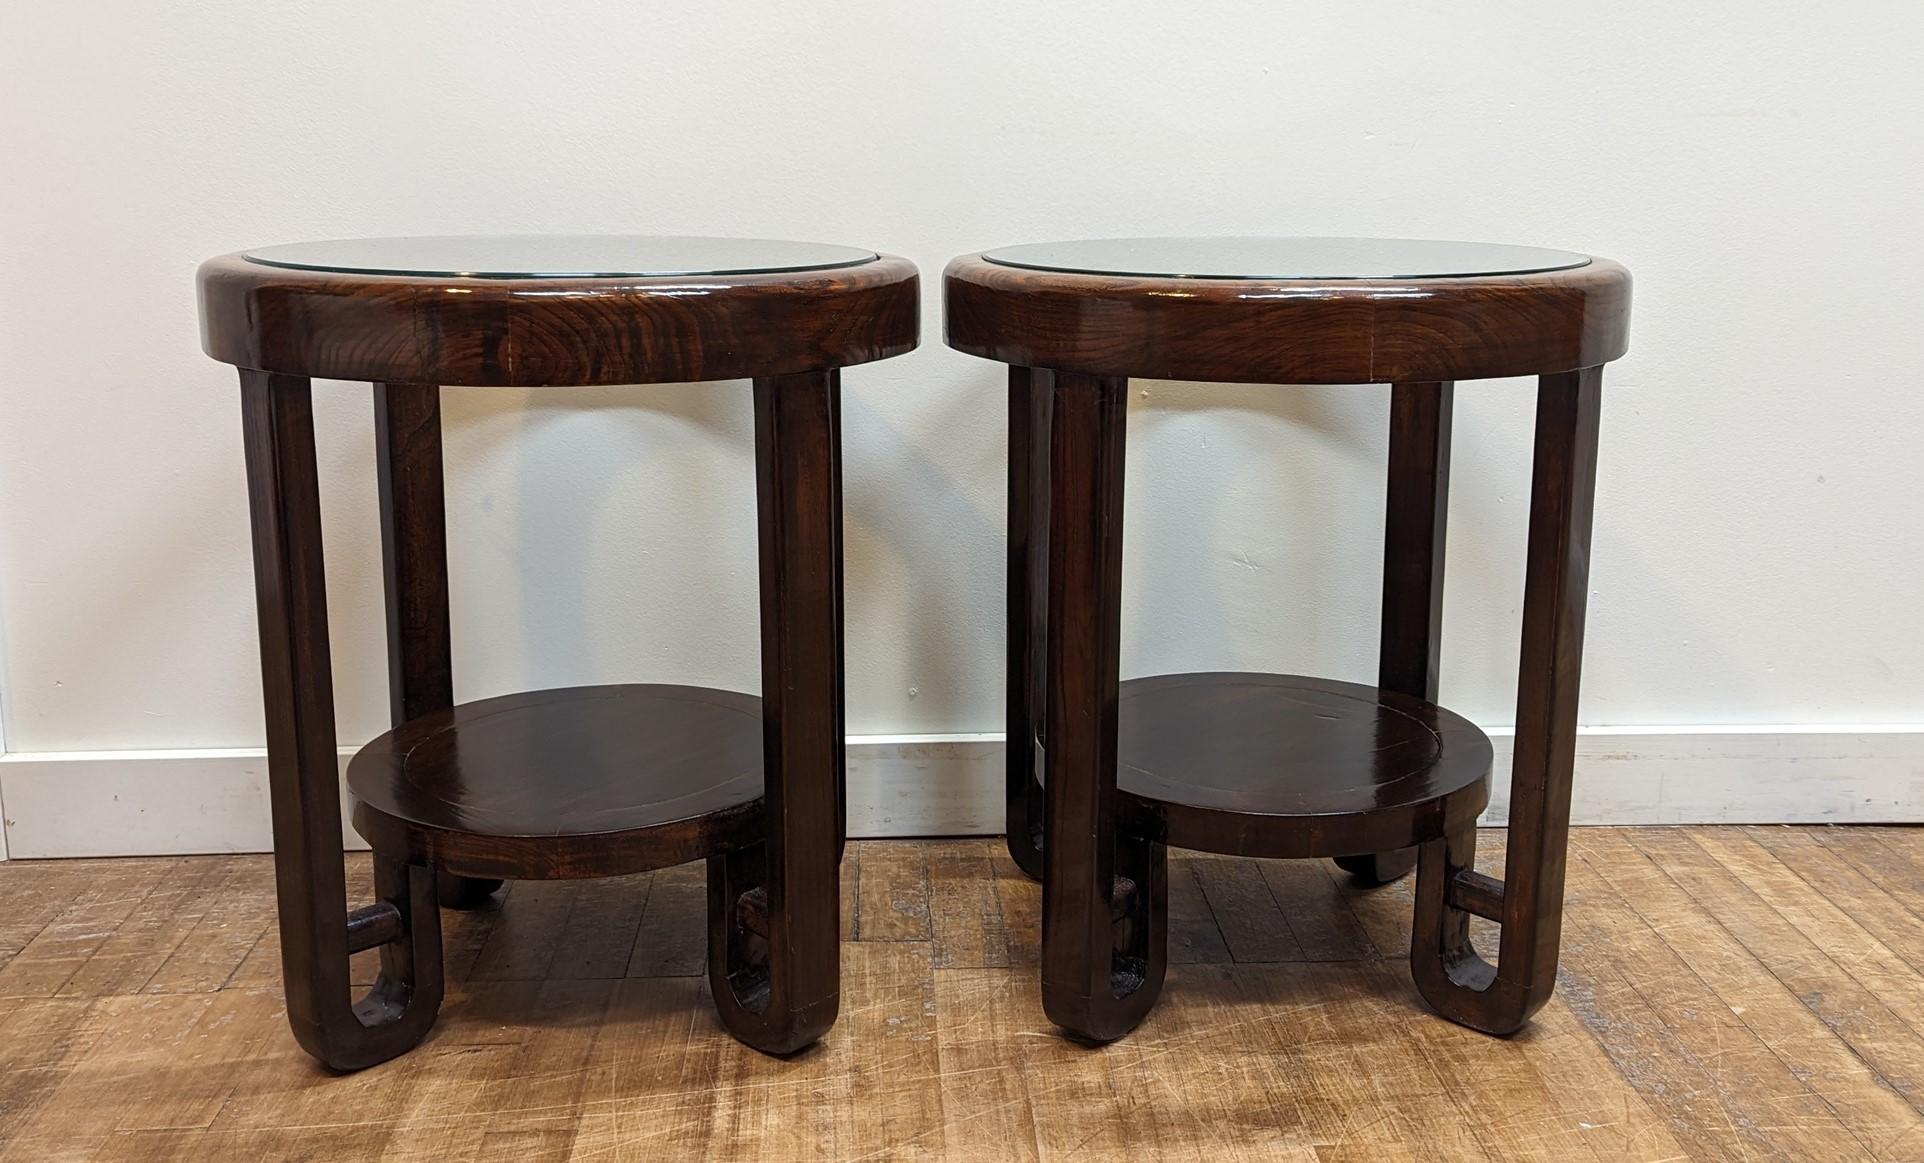 Pair of Art Deco style glass top side tables.  The tables are solid Elm Wood with thick glass inset tops.  Tables and tops are in very good condition.  One table has an indentation to the wood surface in the lower shelf.   Stunning pair of tables.  